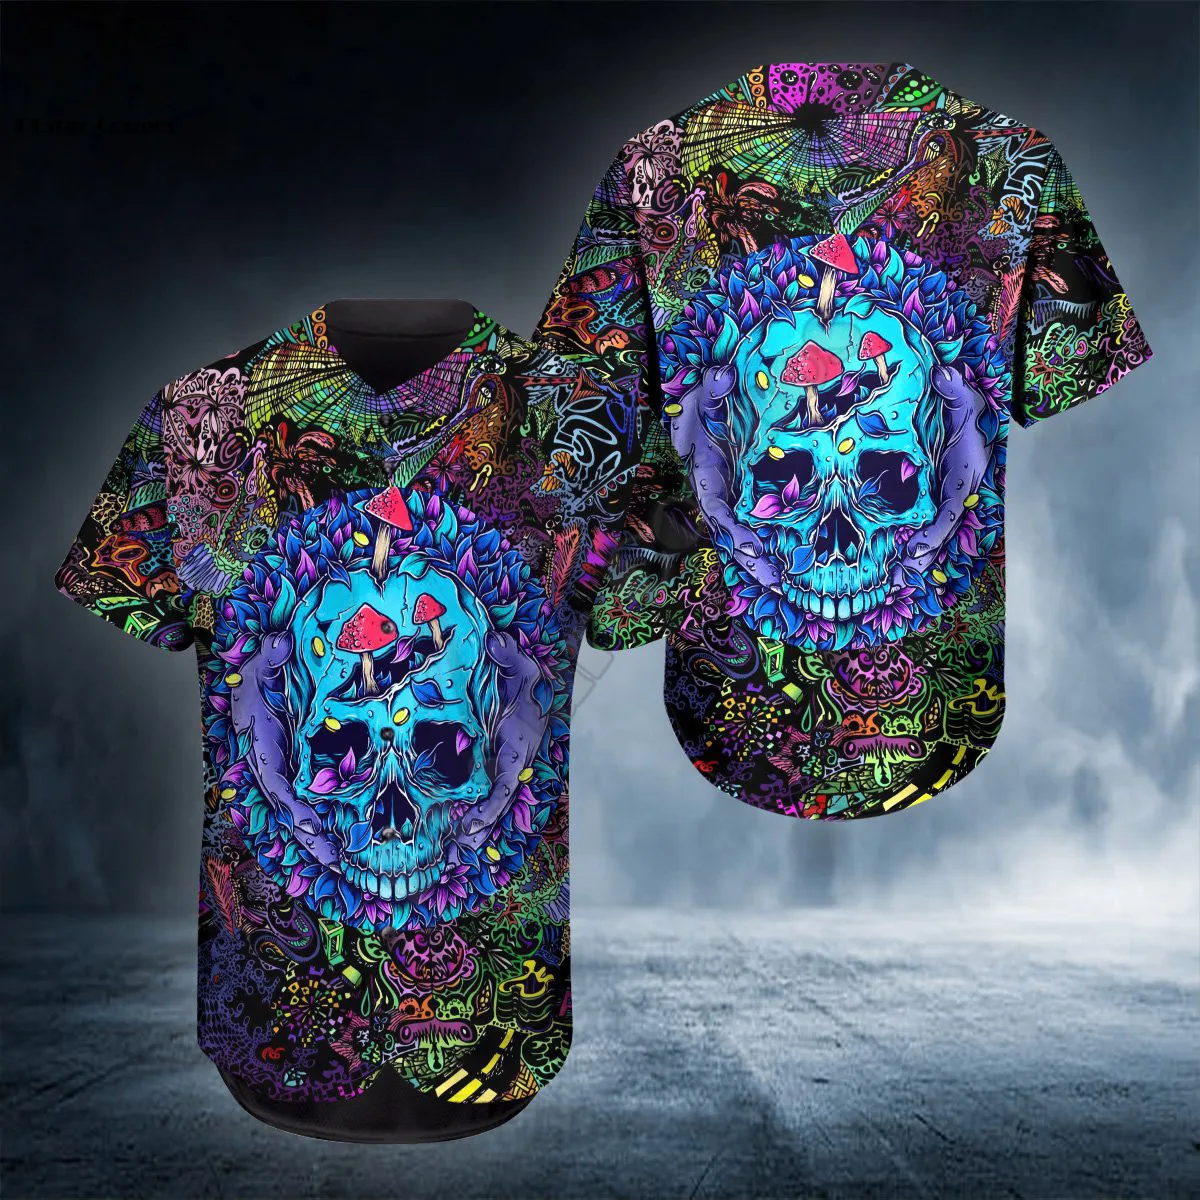 PLstar Cosmos Baseball Jersey Shirt Jungle Skull 3D All Over Printed Baseball Jersey Us Size Love Skull Gift hip hop Tops plstar cosmos lovely penguin 3d printed fashion men s ugly christmas sweater winter unisex casual knit pullover sweater myy45